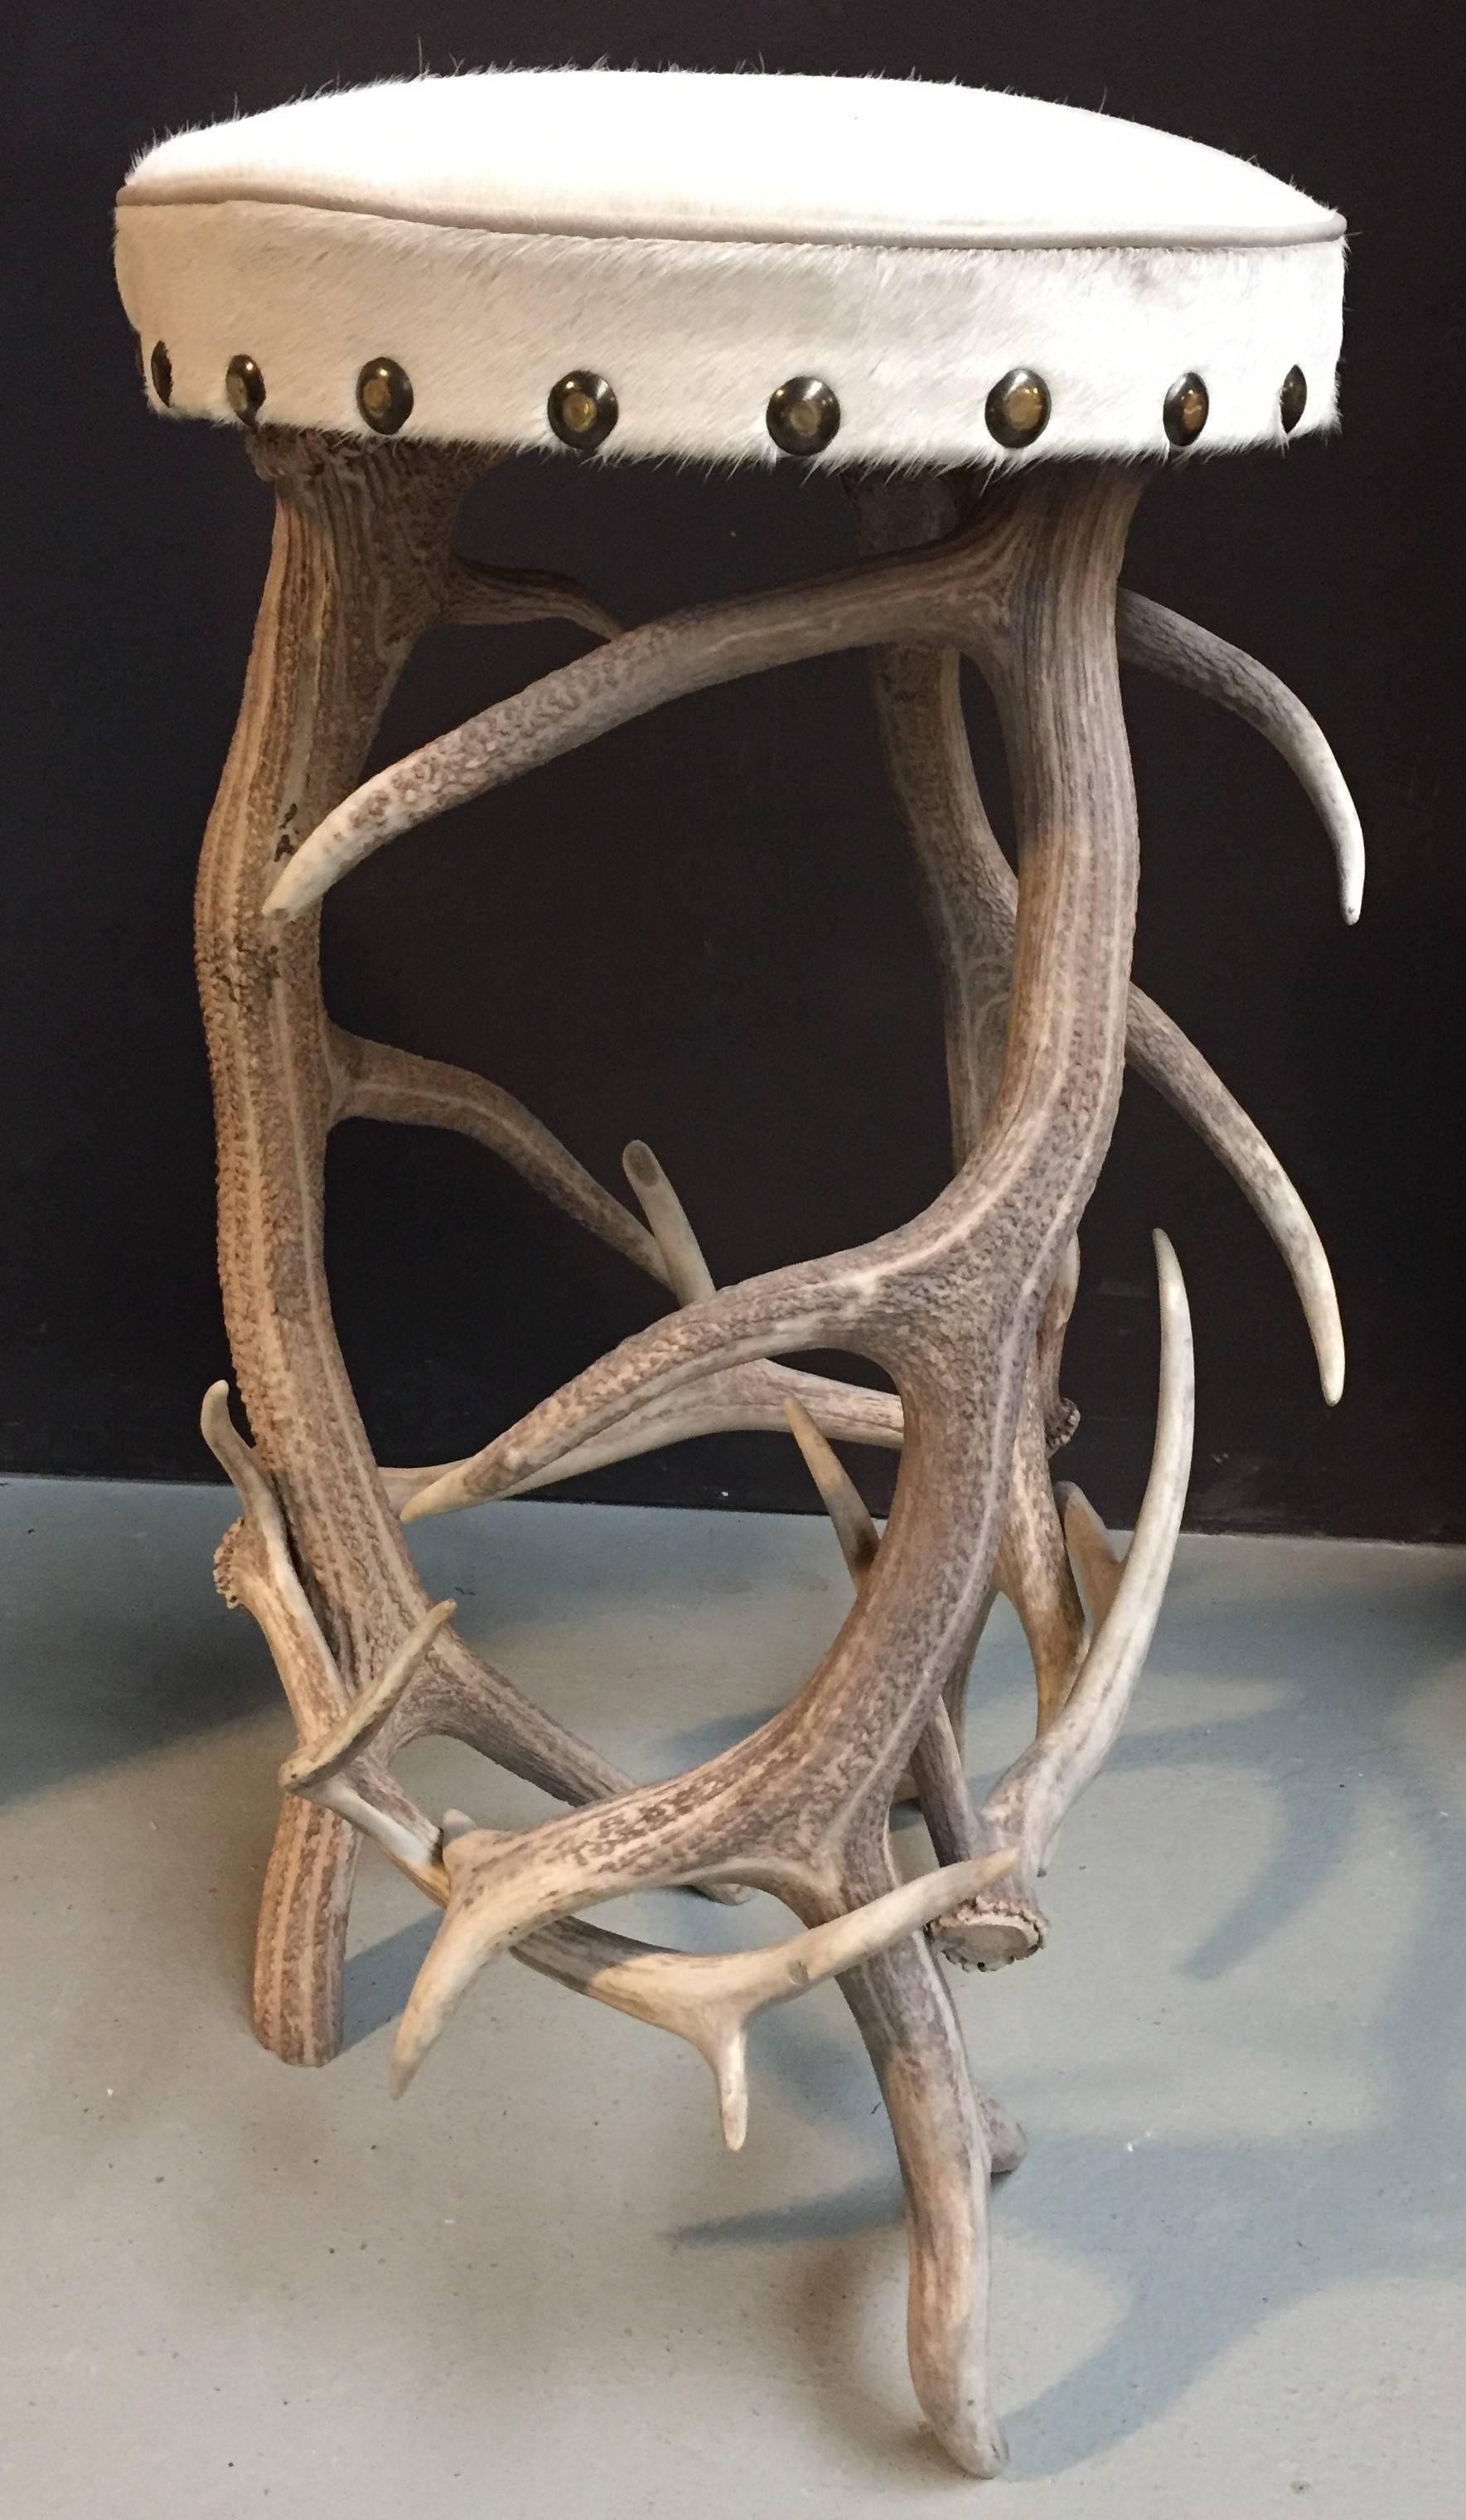 Bar stool made of red deer antlers, upholstered with Equadorian cow hide.